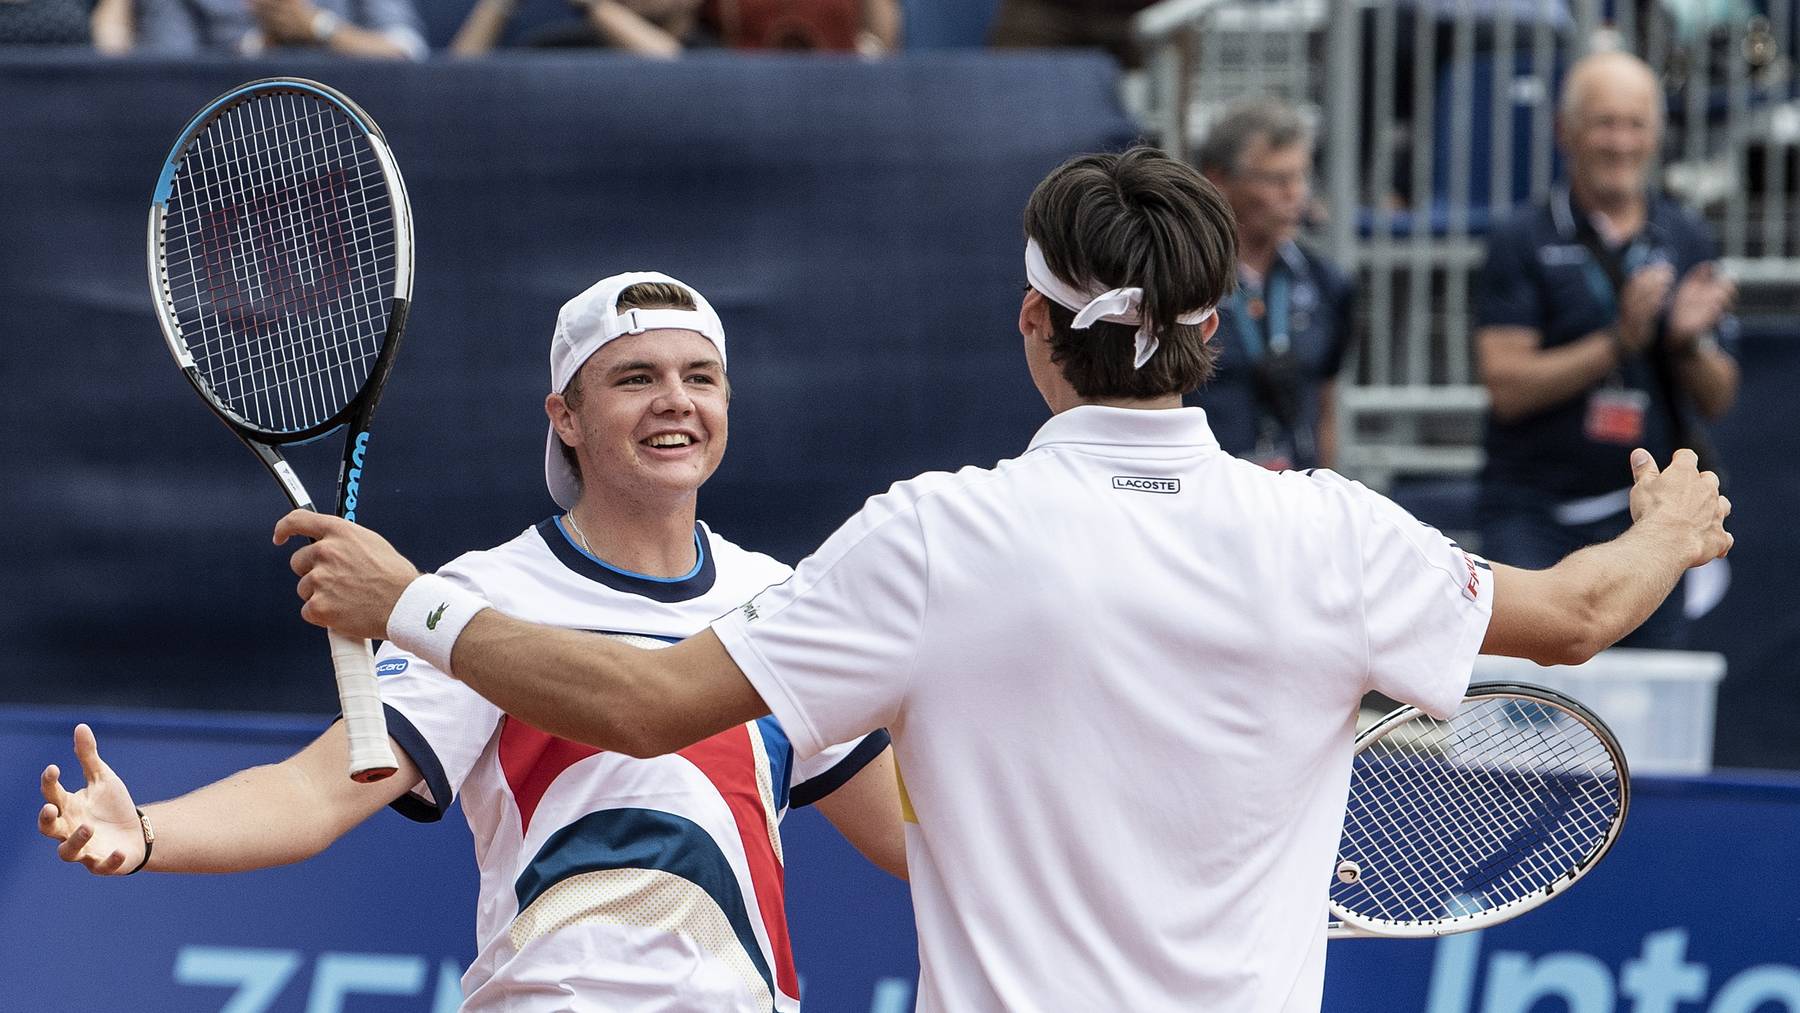 Swiss players Marc Andrea Huesler (R) and Dominic Stephan Stricker (L) celebrate after defeating Benoit Paire and Arthur Rinderknech of France in their doubles semi final match of the Swiss Open tennis tournament in Gstaad, Switzerland, 24 July 2021.